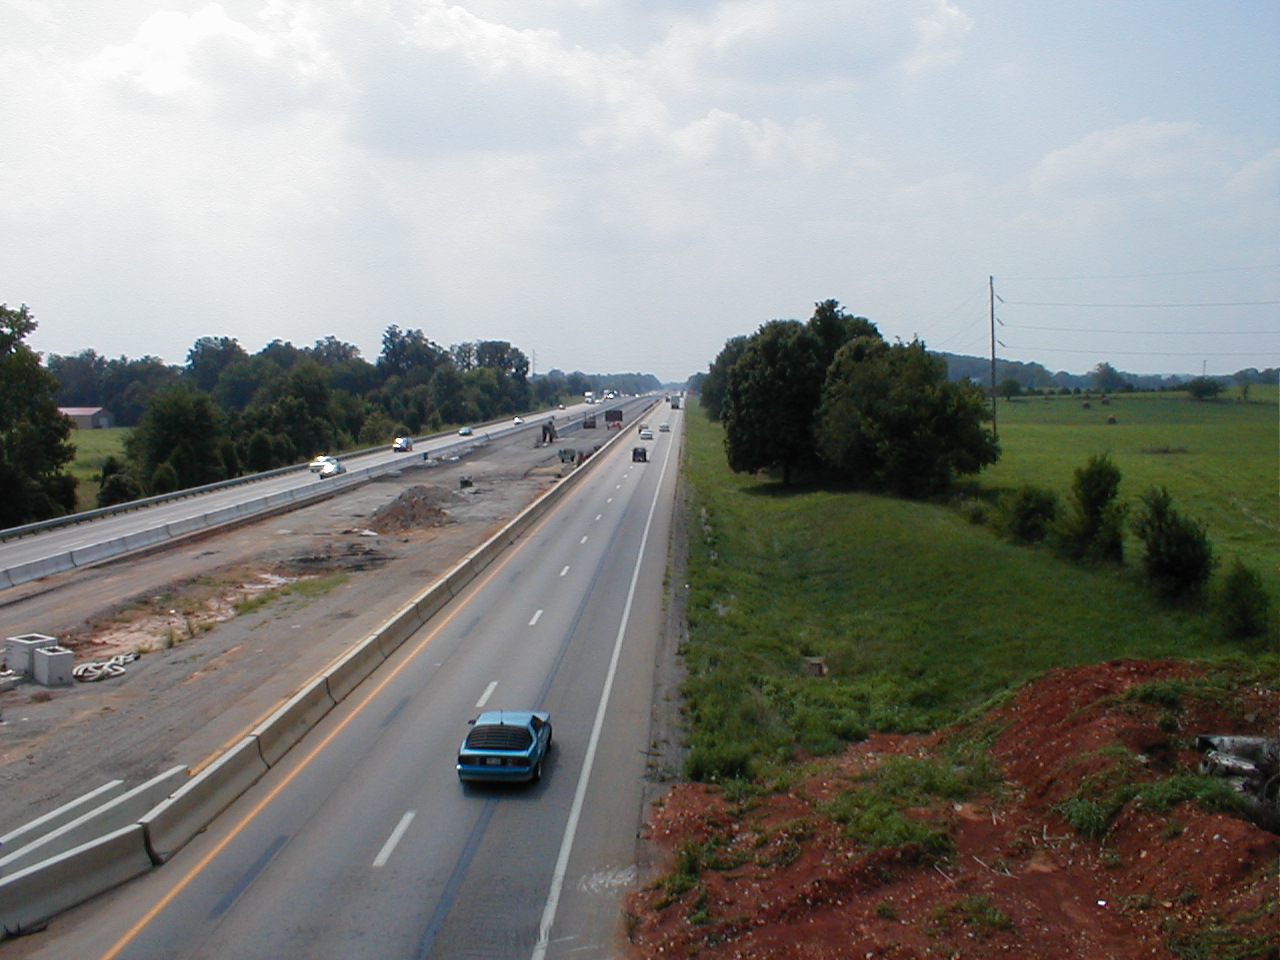 The south bound lanes of I-65.